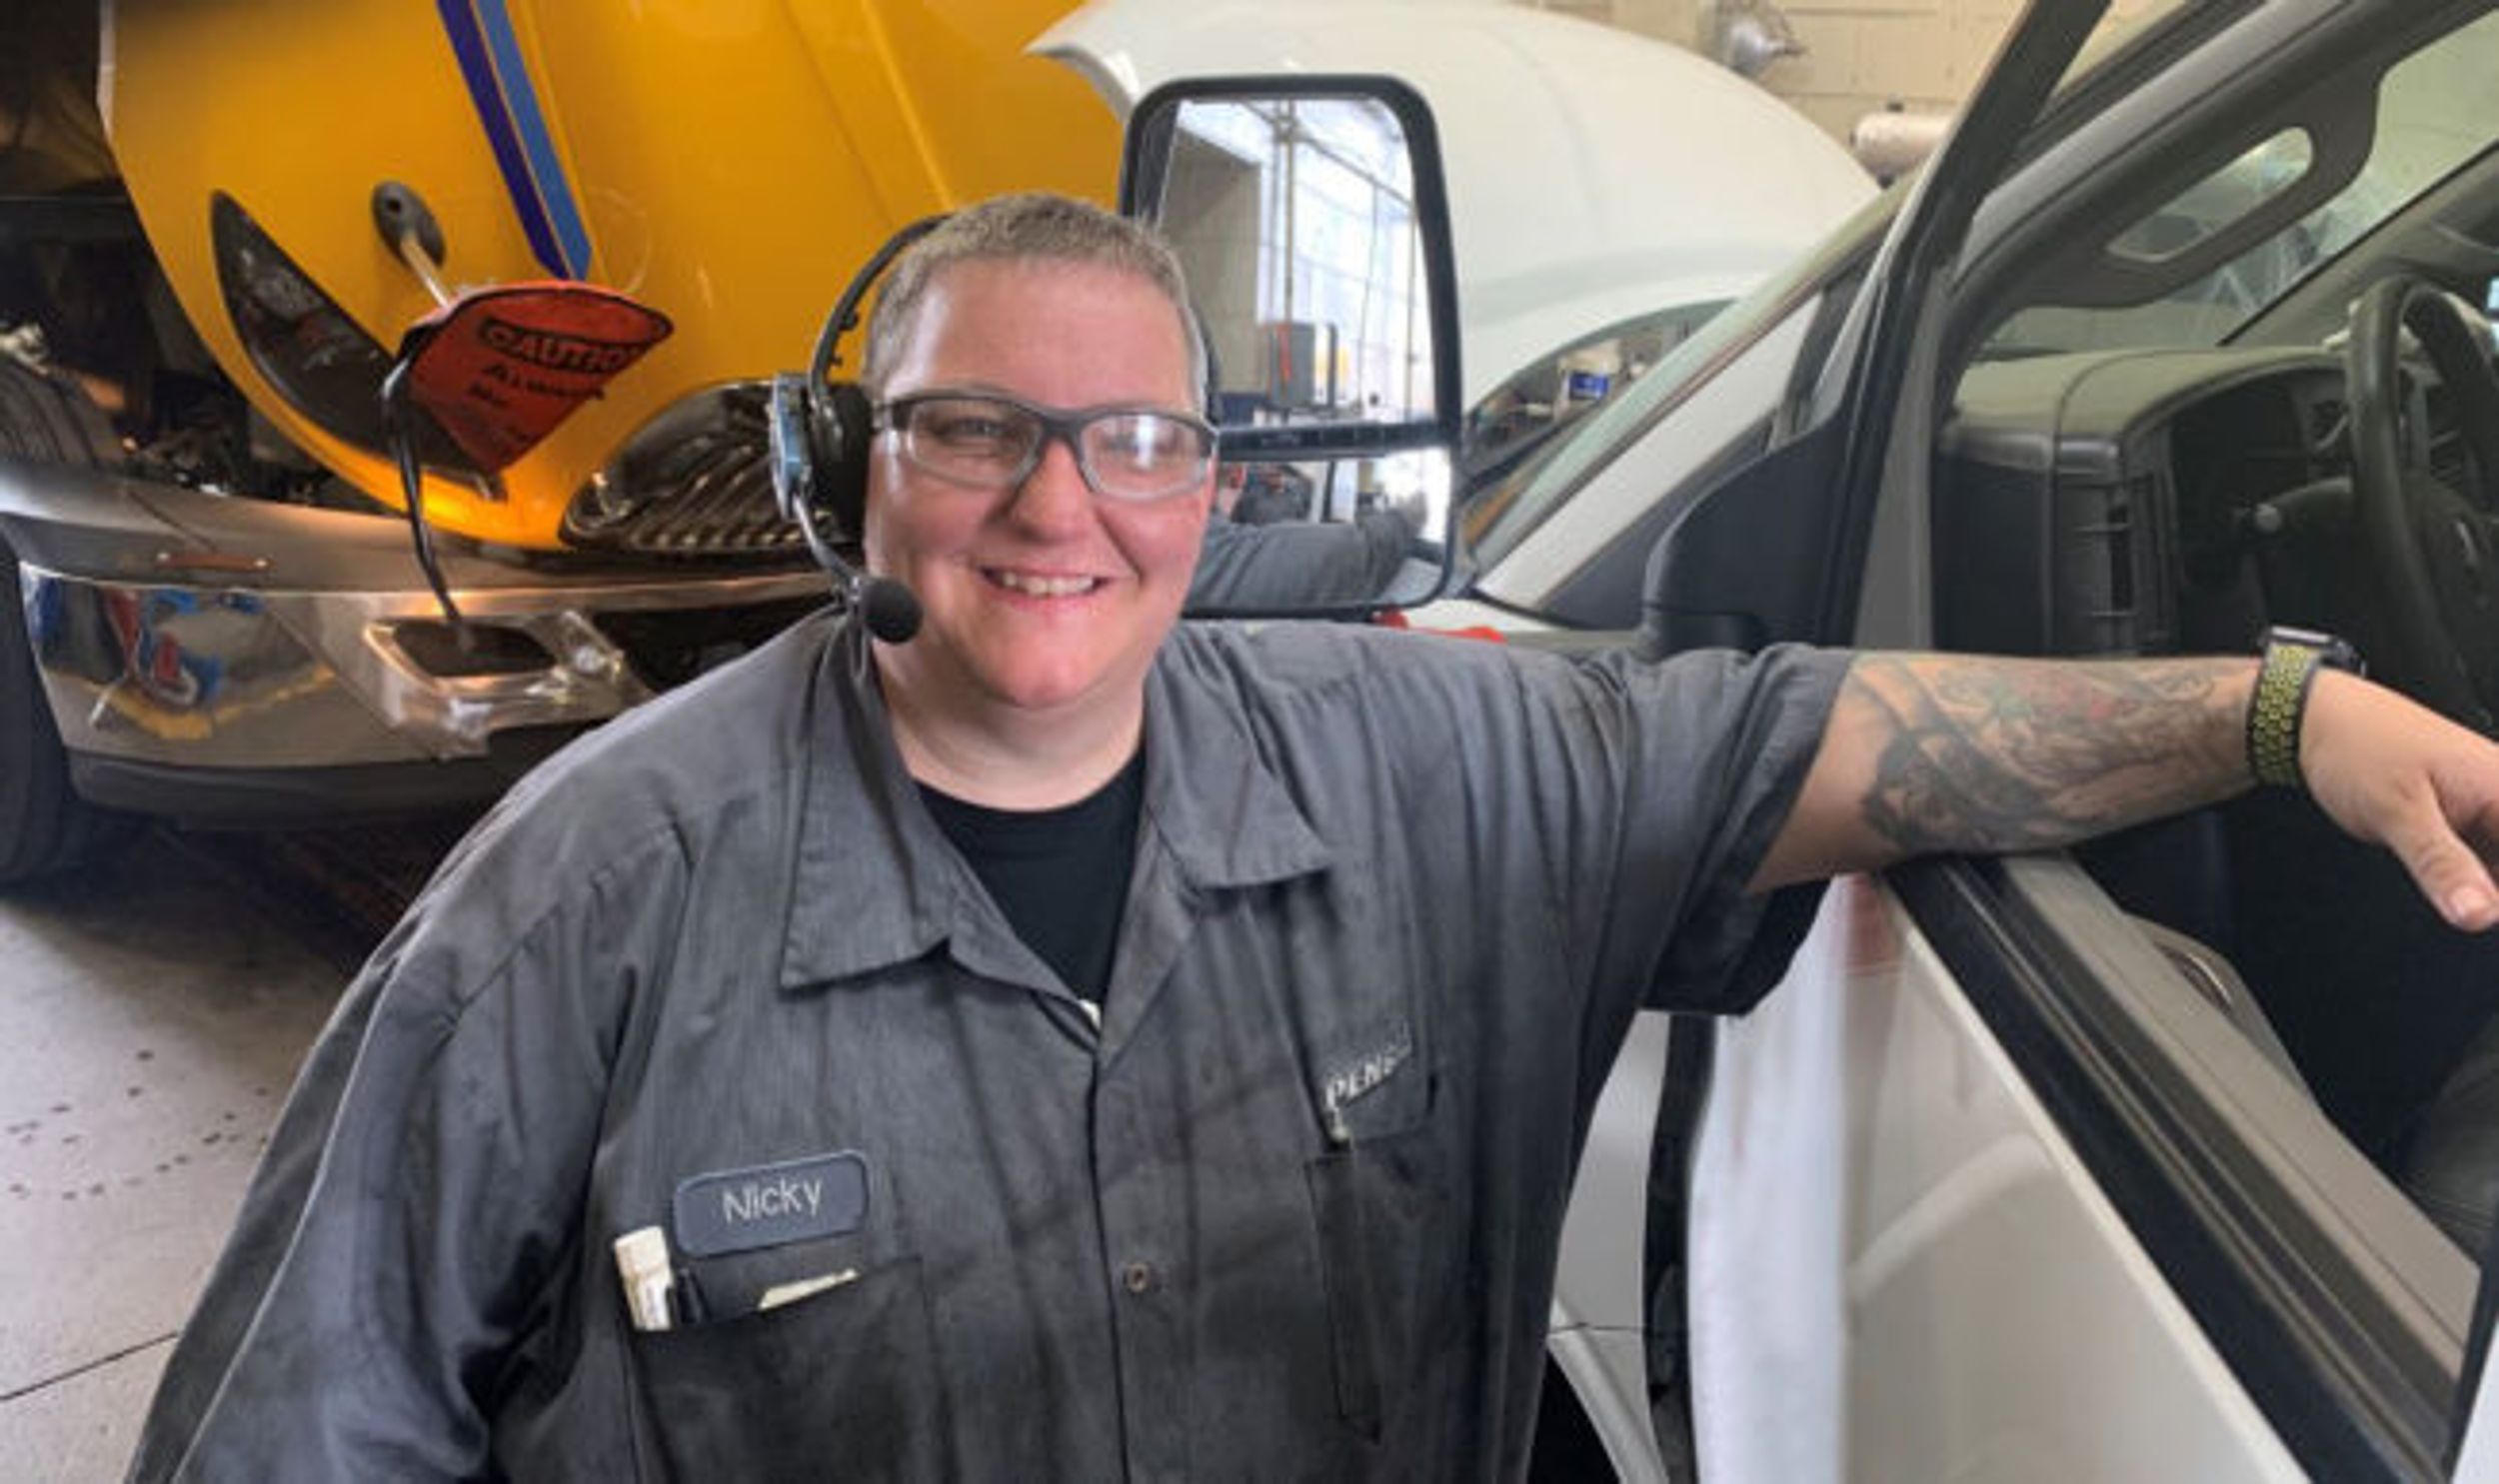 Technician Experiences Great Career Growth at Penske